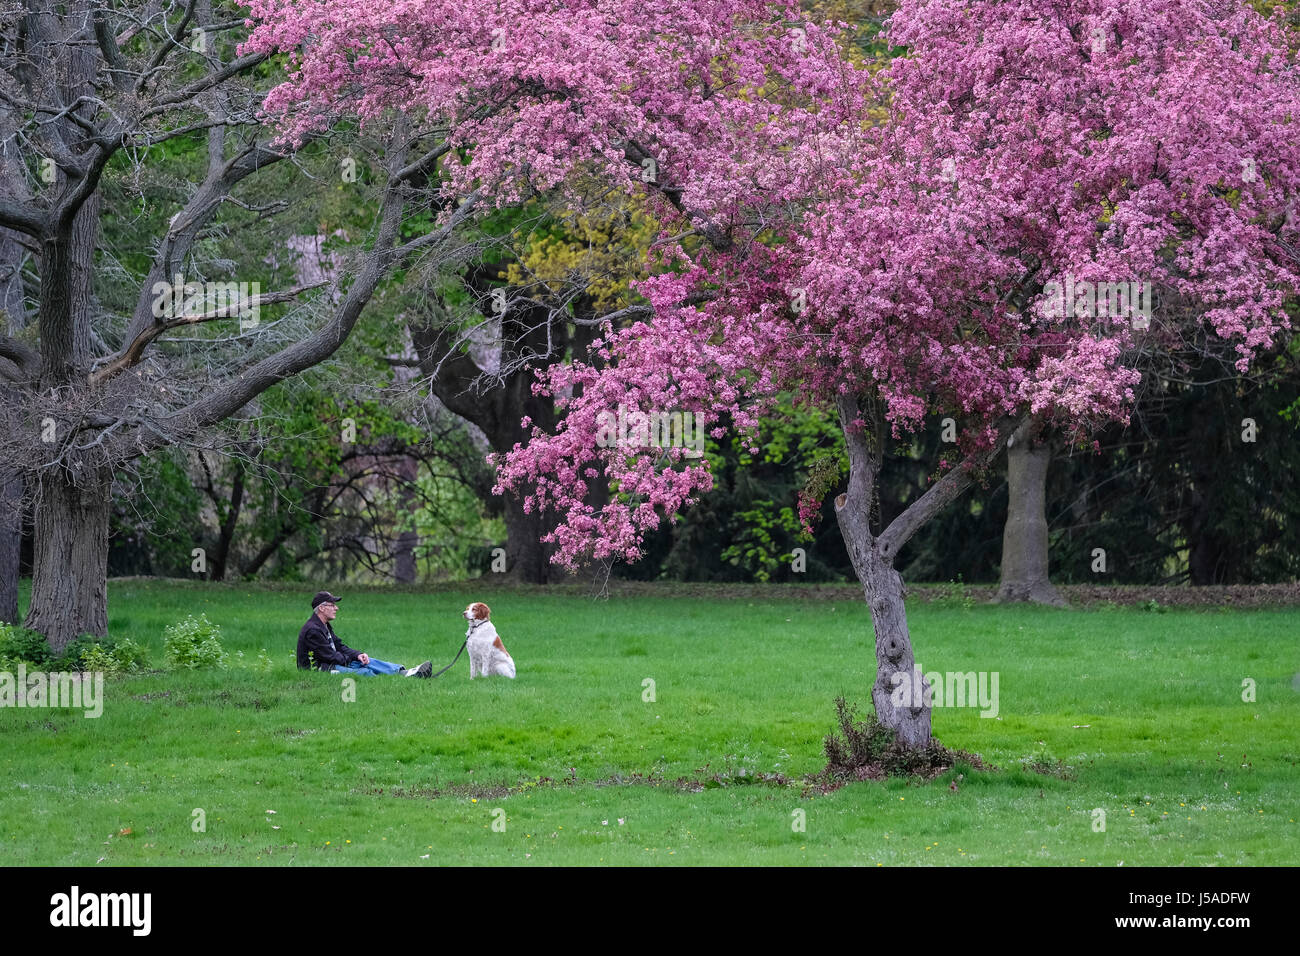 Middle-aged man and dog sitting on green grass, flowering crabapple tree, park setting, peaceful, taking a break, relaxing, companionship, Spring. Stock Photo